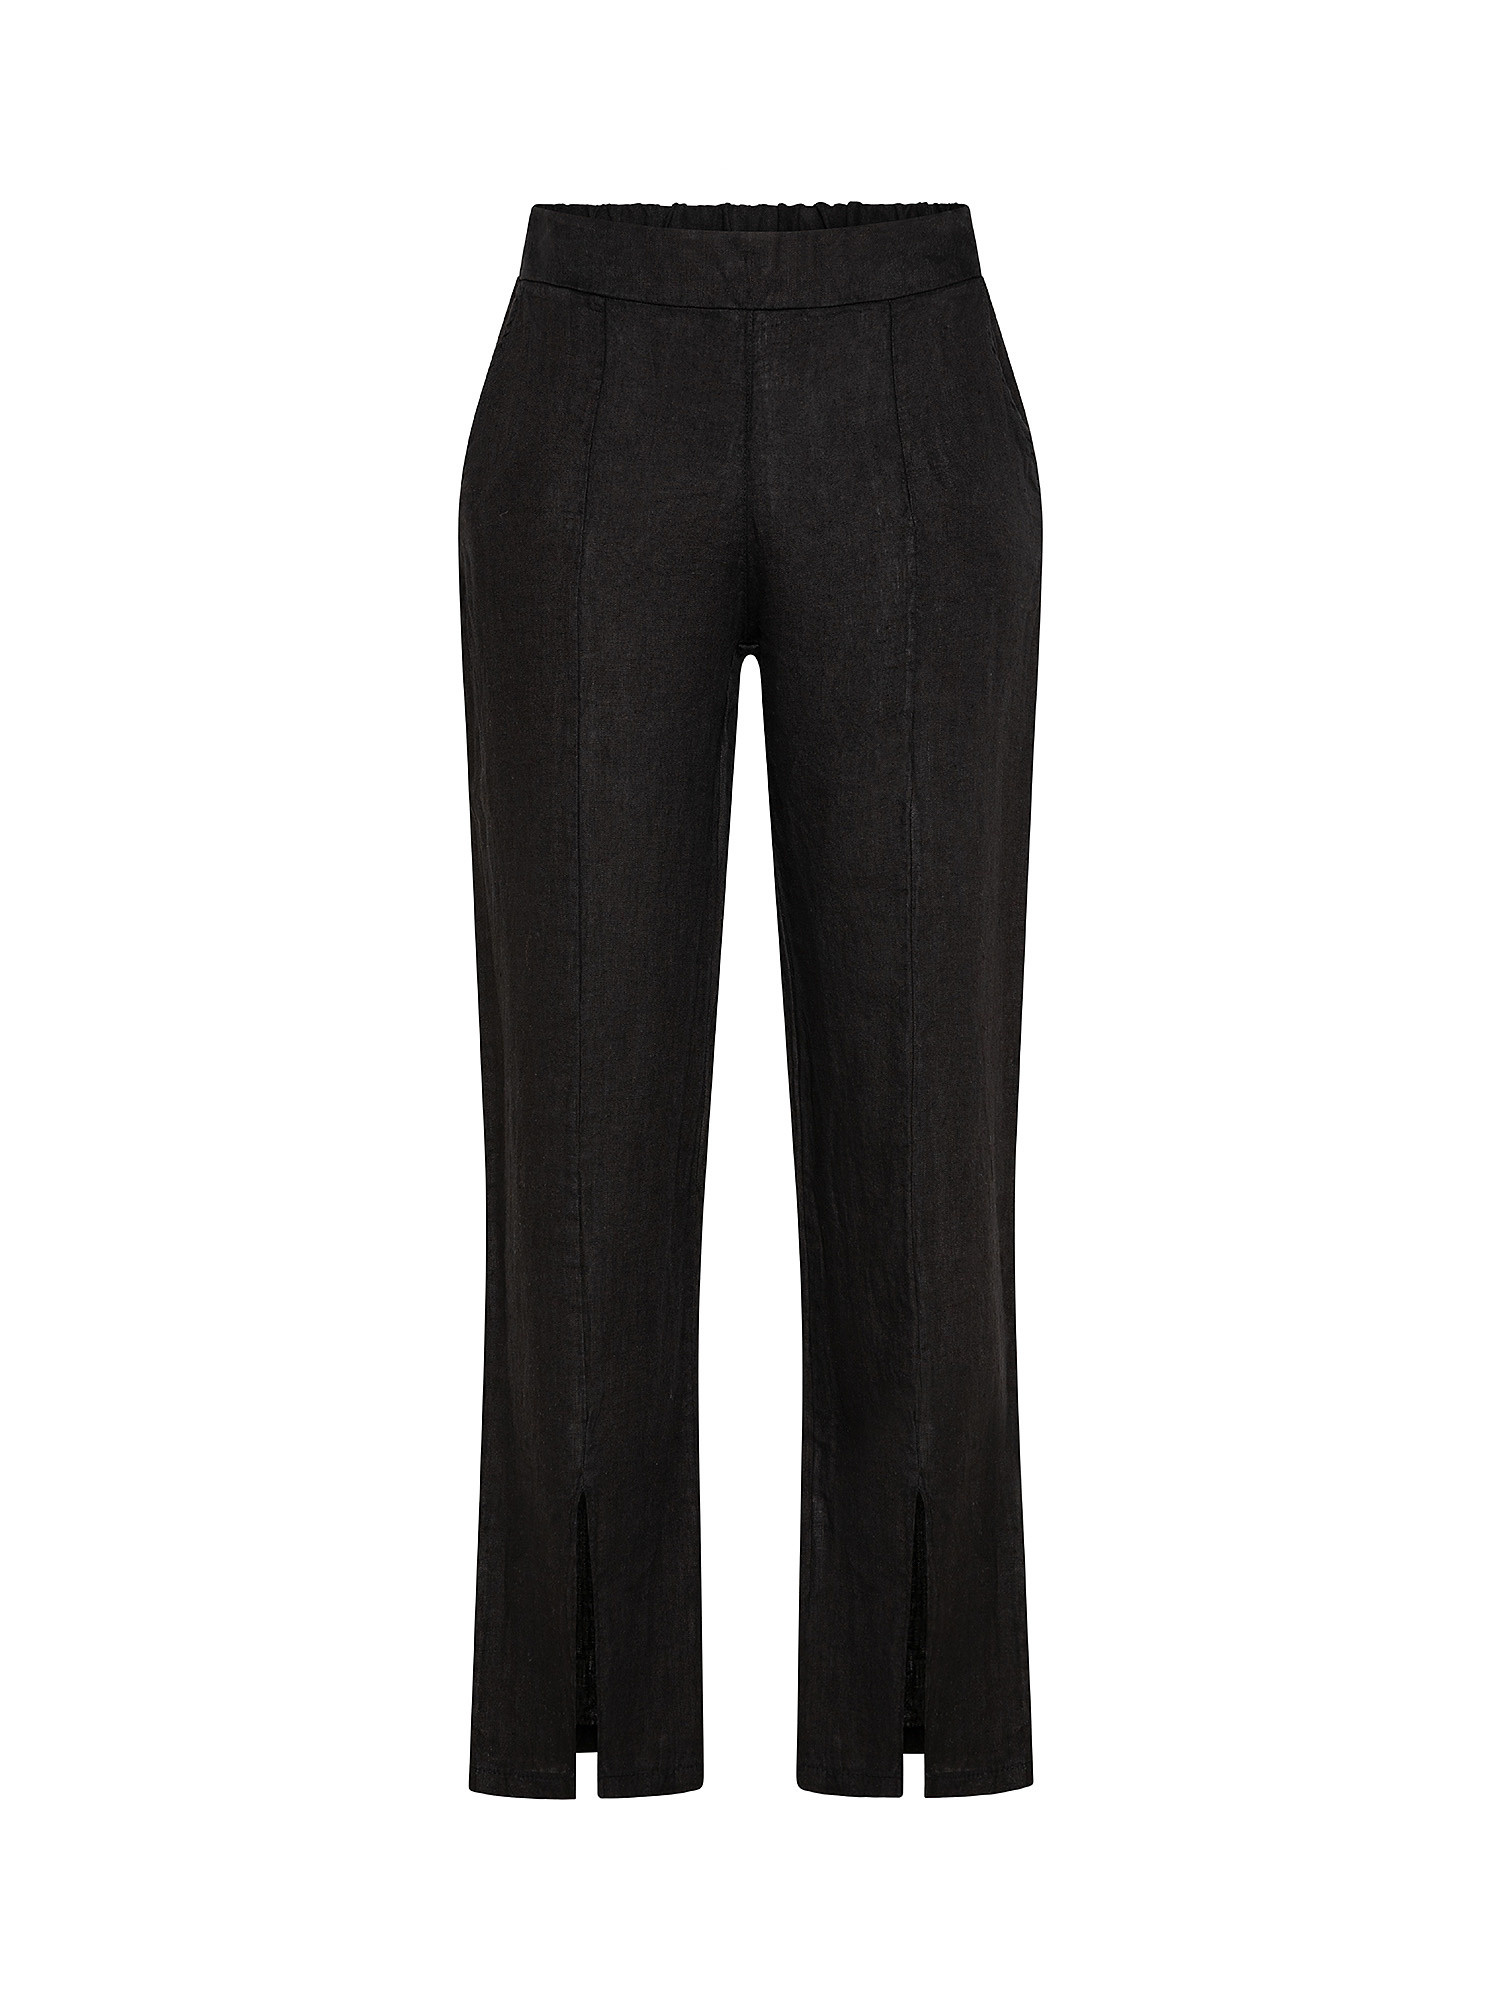 Pure linen trousers with slit, Black, large image number 0